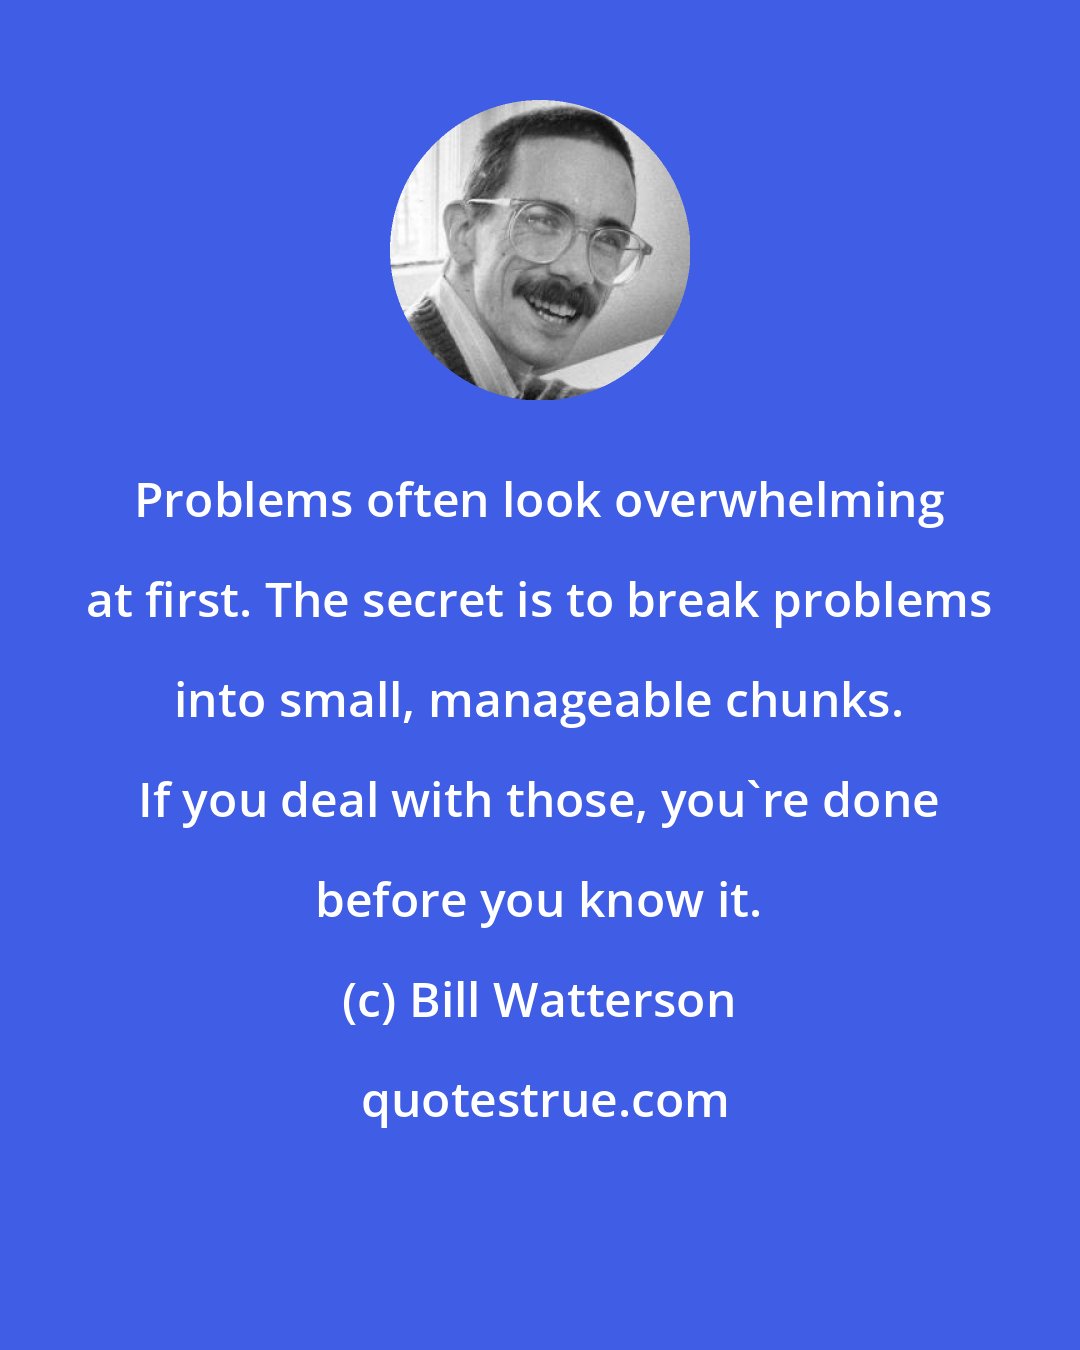 Bill Watterson: Problems often look overwhelming at first. The secret is to break problems into small, manageable chunks. If you deal with those, you're done before you know it.